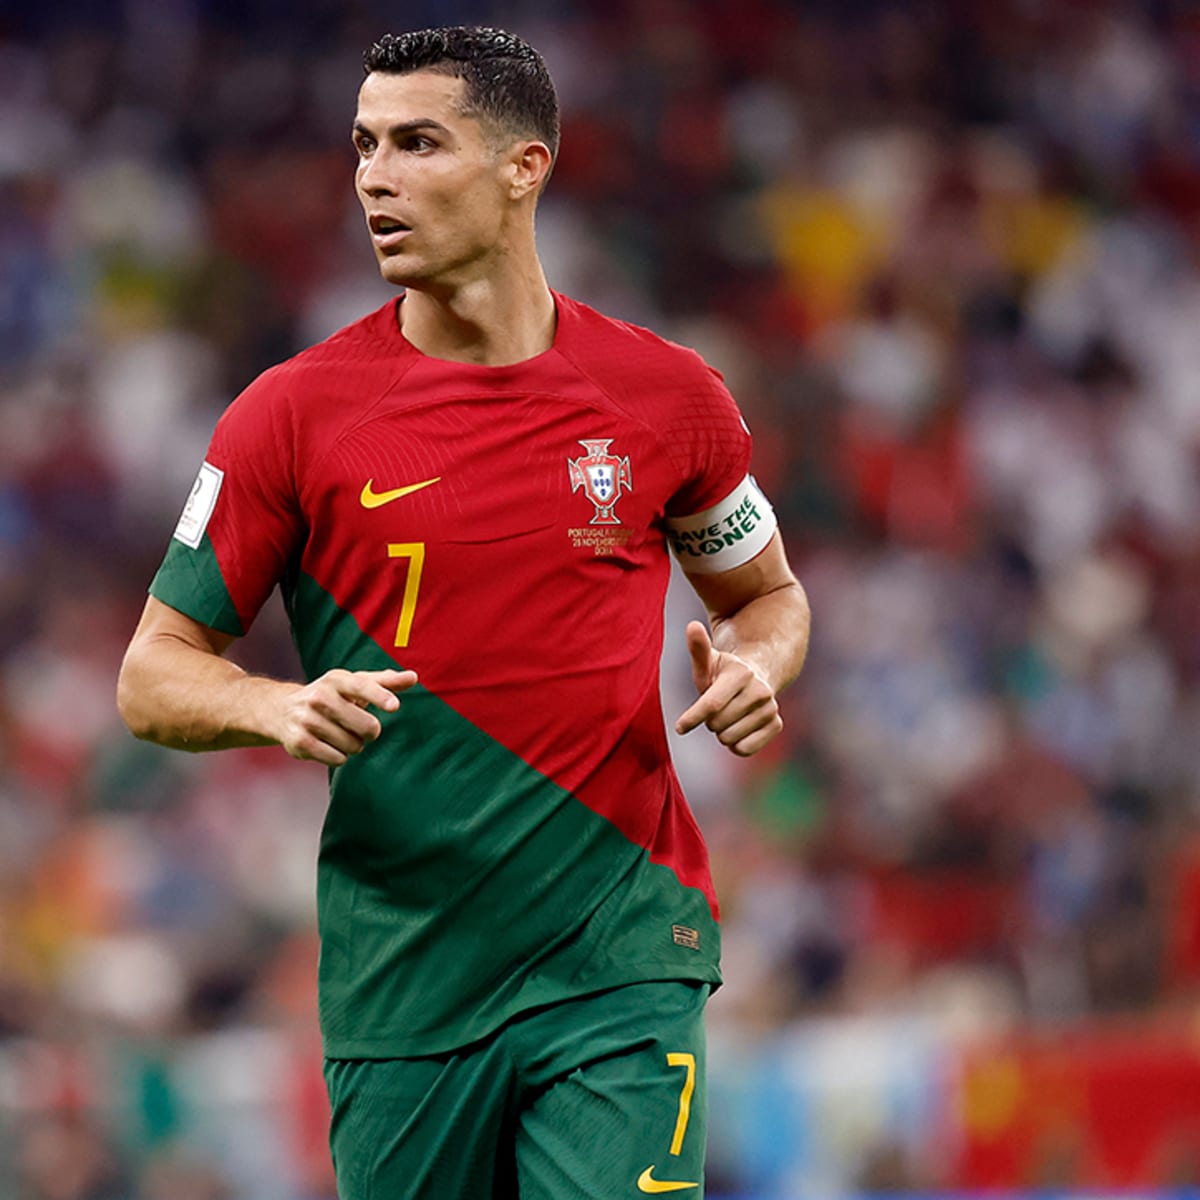 Ronaldo says historic rivalry with Messi is 'gone